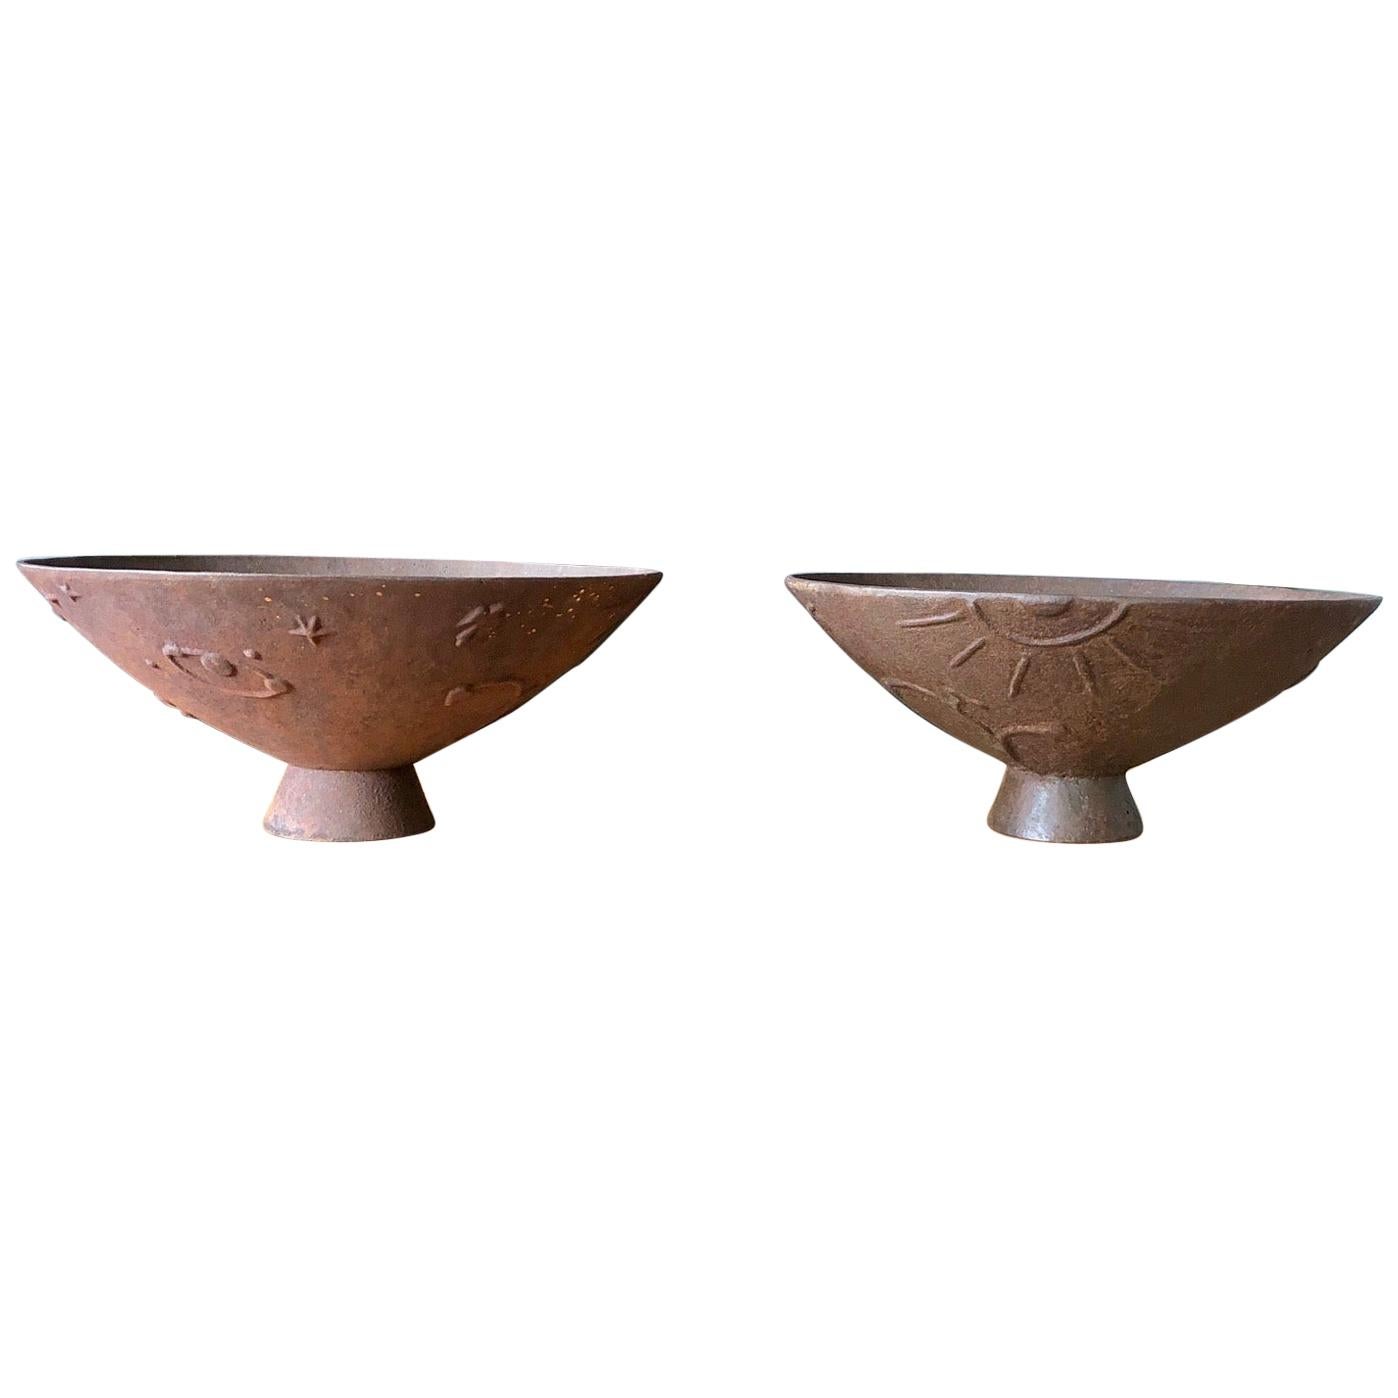 Pair of Cast Iron Urns “Mikrokosmos” by Olof Hult For Sale